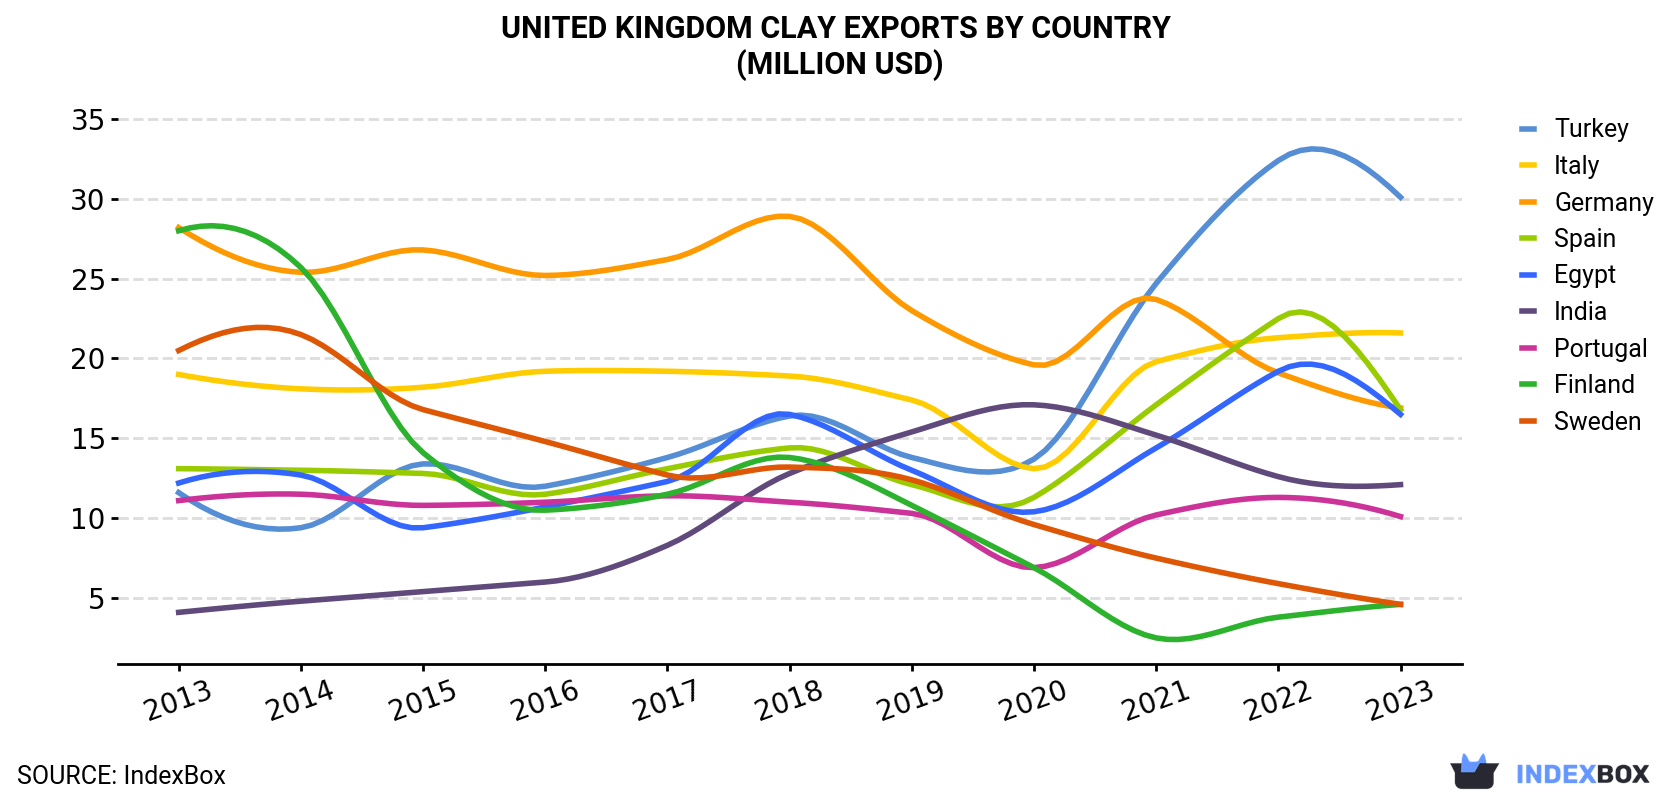 United Kingdom Clay Exports By Country (Million USD)